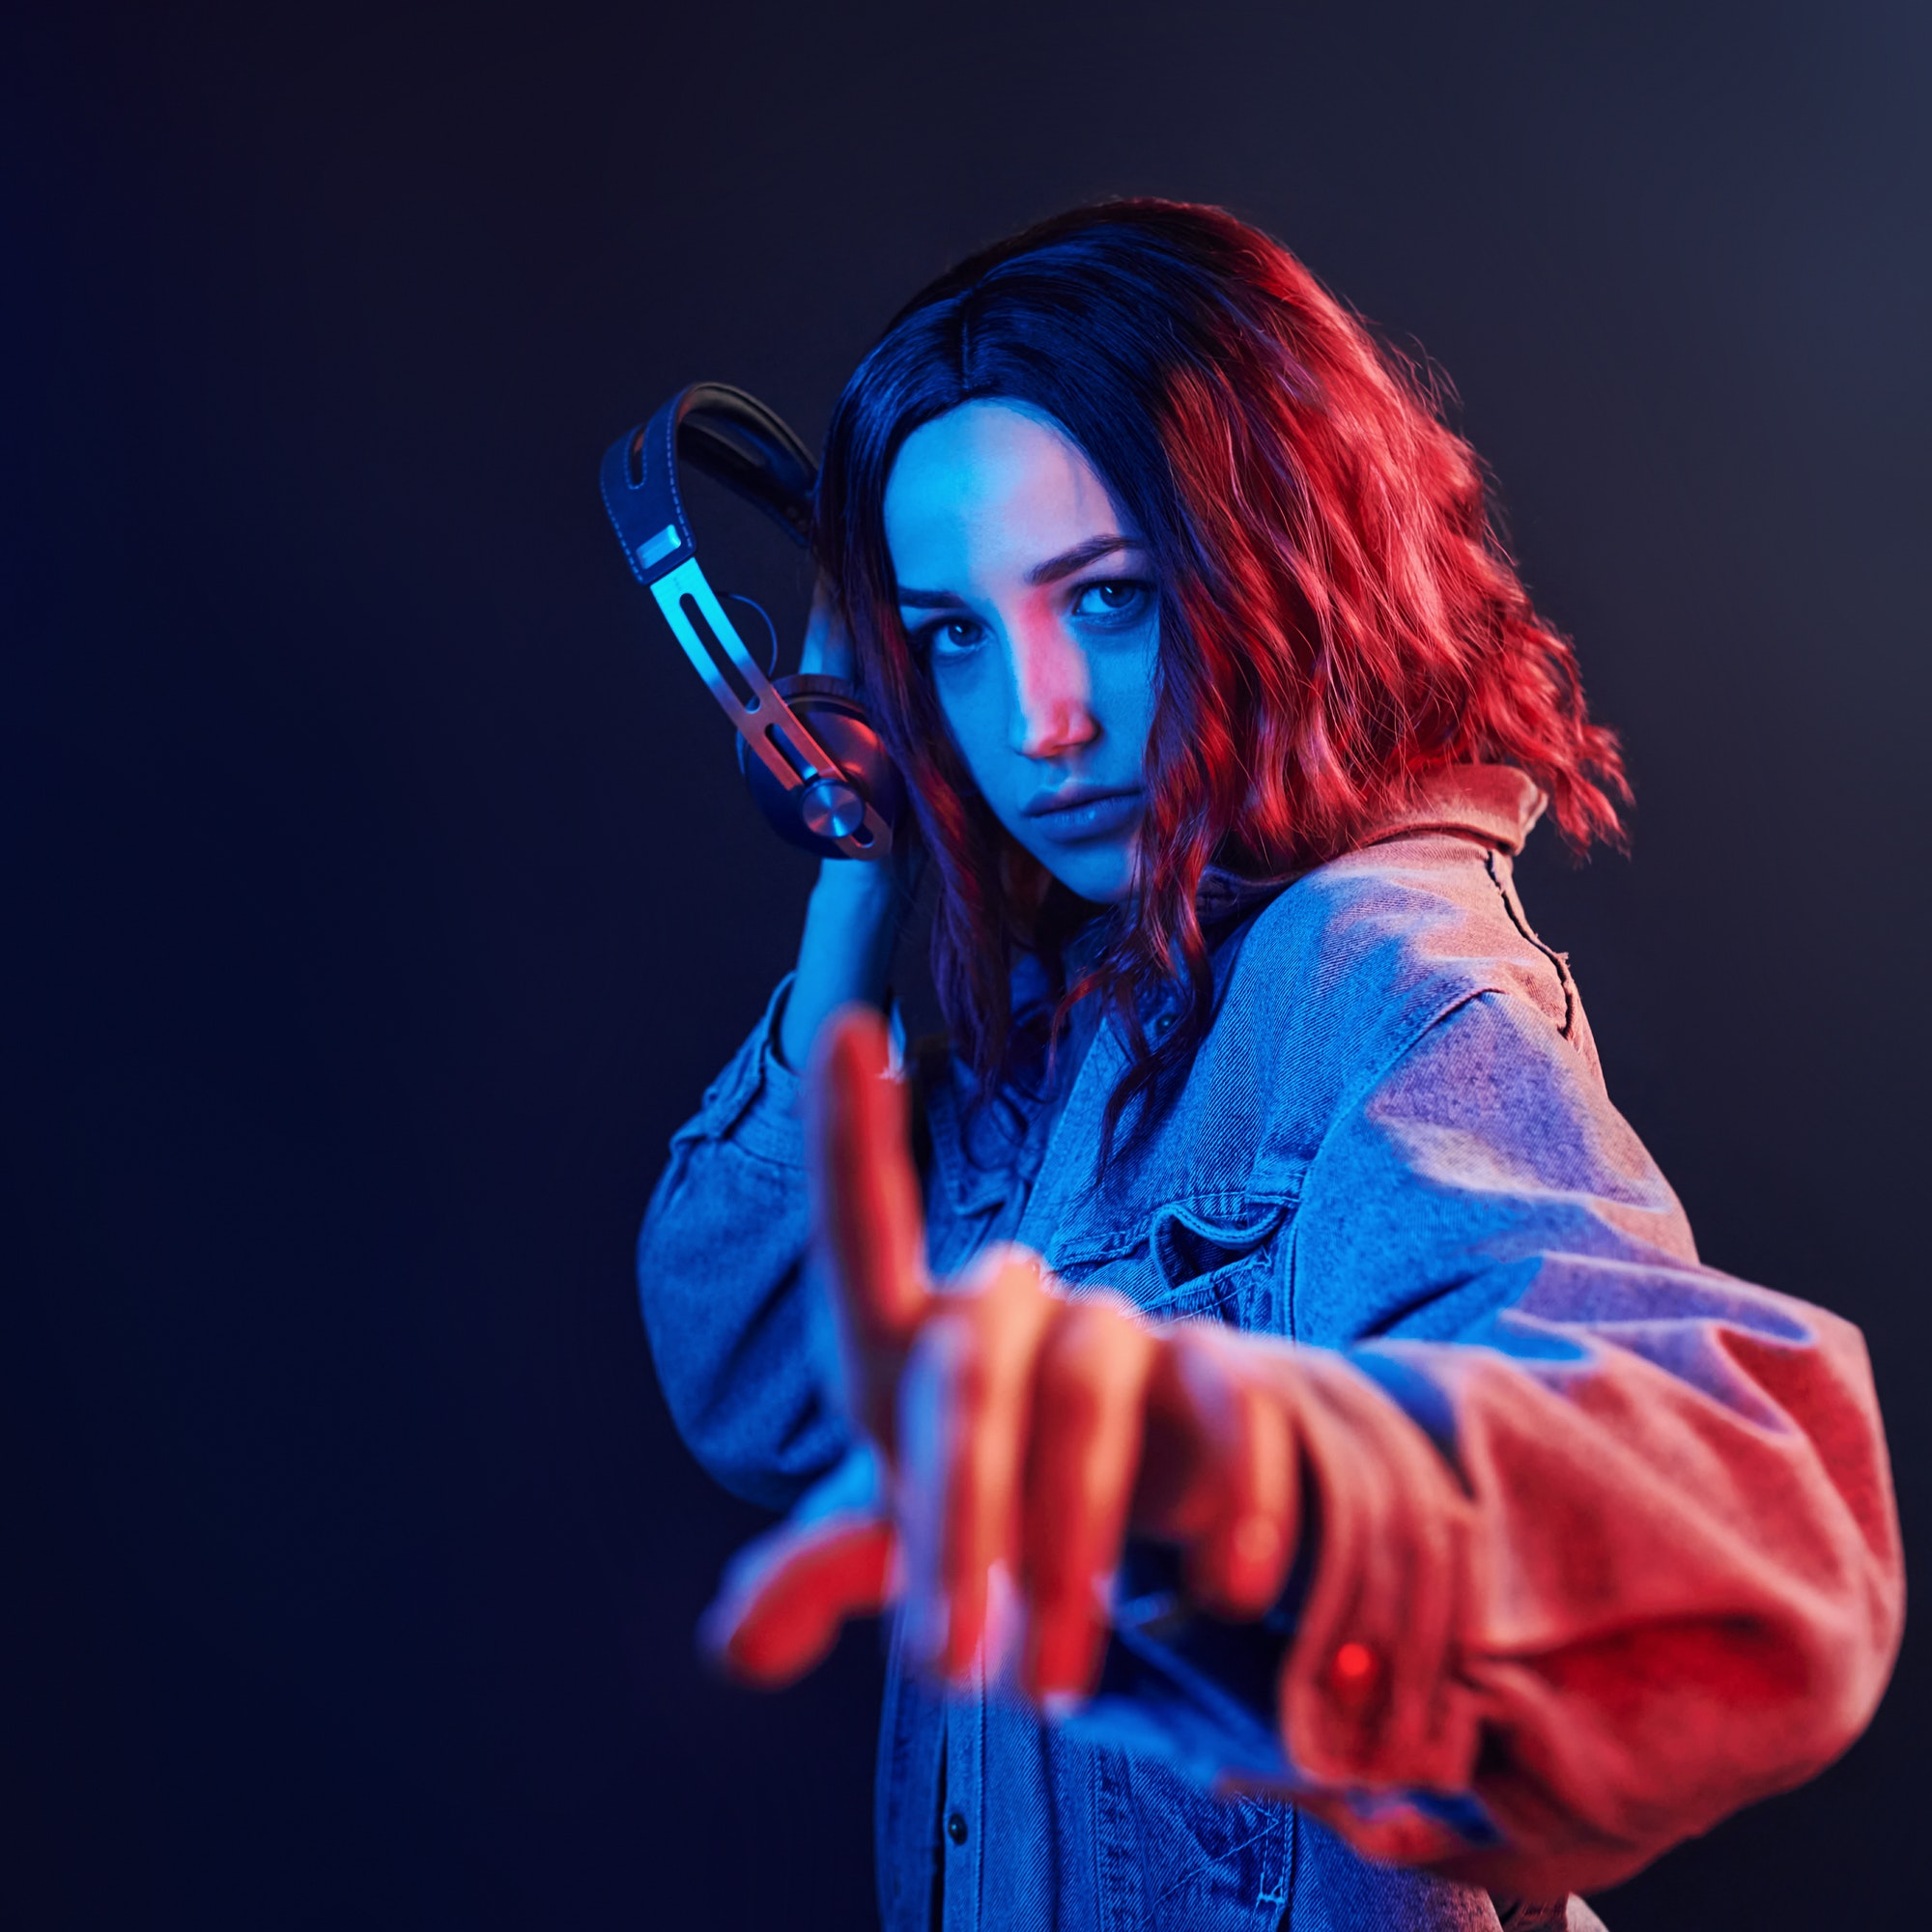 portrait-of-young-girl-that-listening-to-music-in-headphones-in-red-and-blue-neon-in-studio.jpg